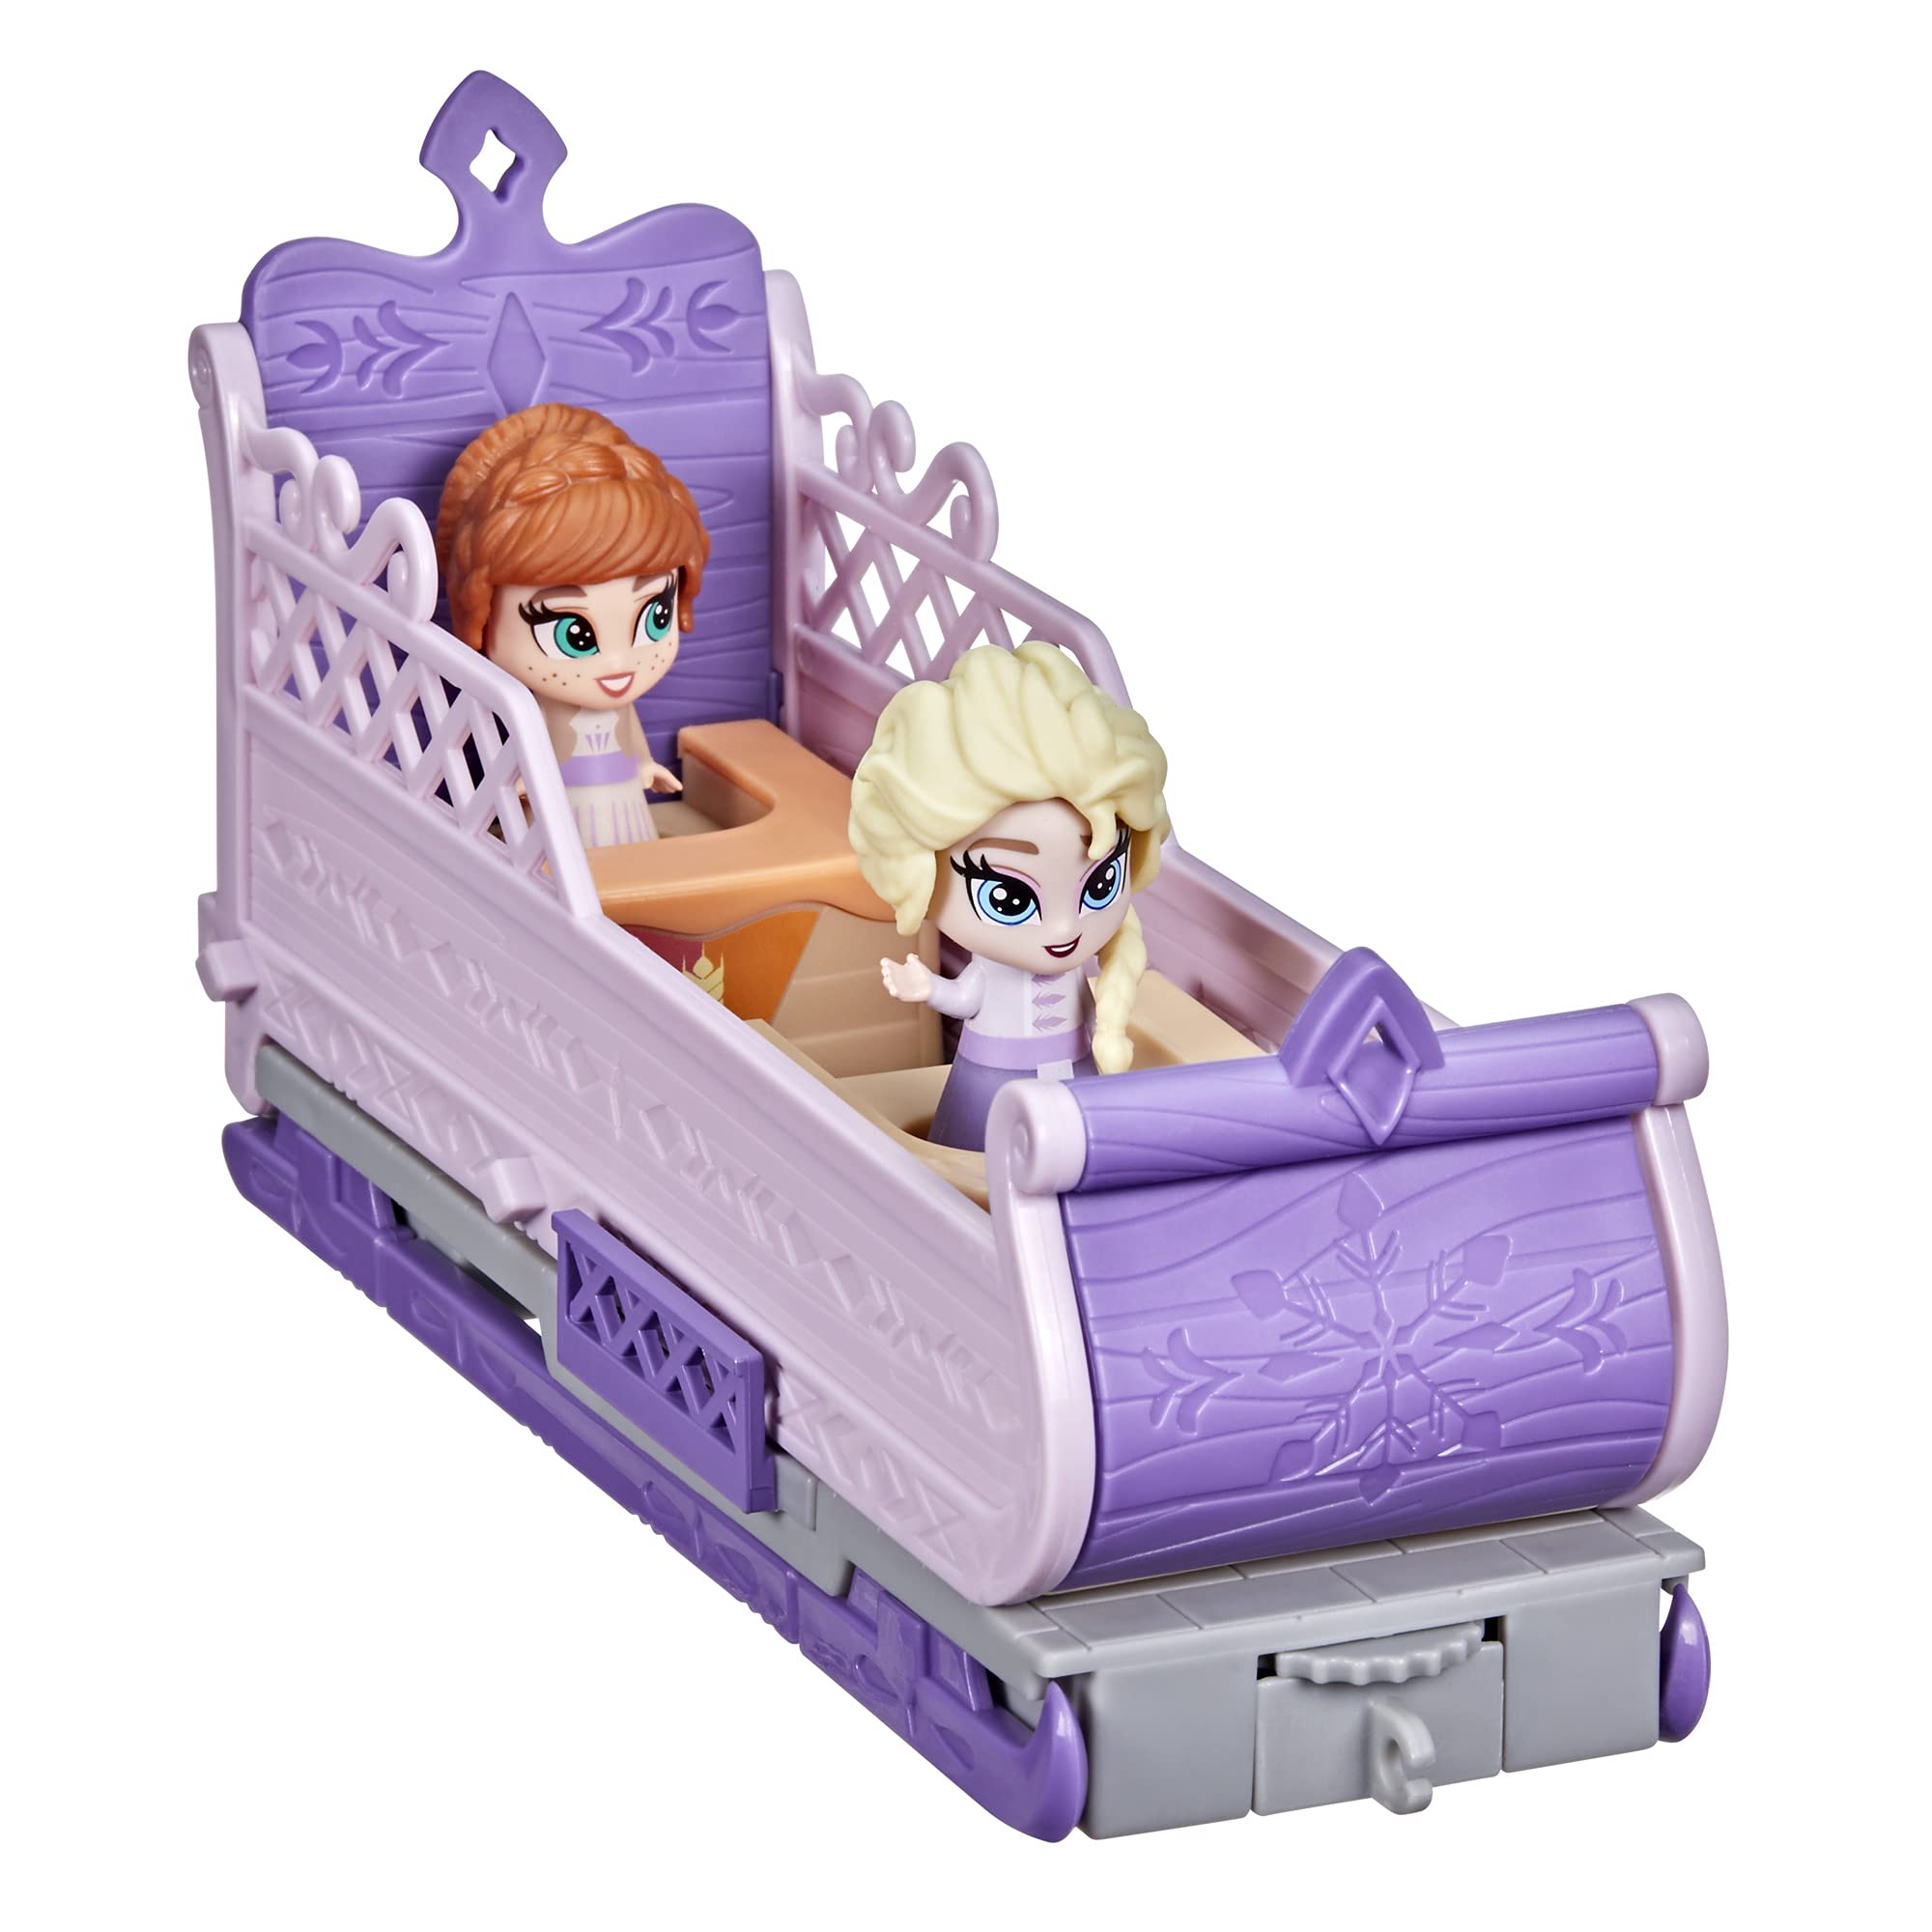 Disney Frozen Hasbro 2 Twirlabouts Picnic Playset Sled-to-Castle with Elsa and Anna Dolls and Accessories, Toys for Kids Ages 3 and Up